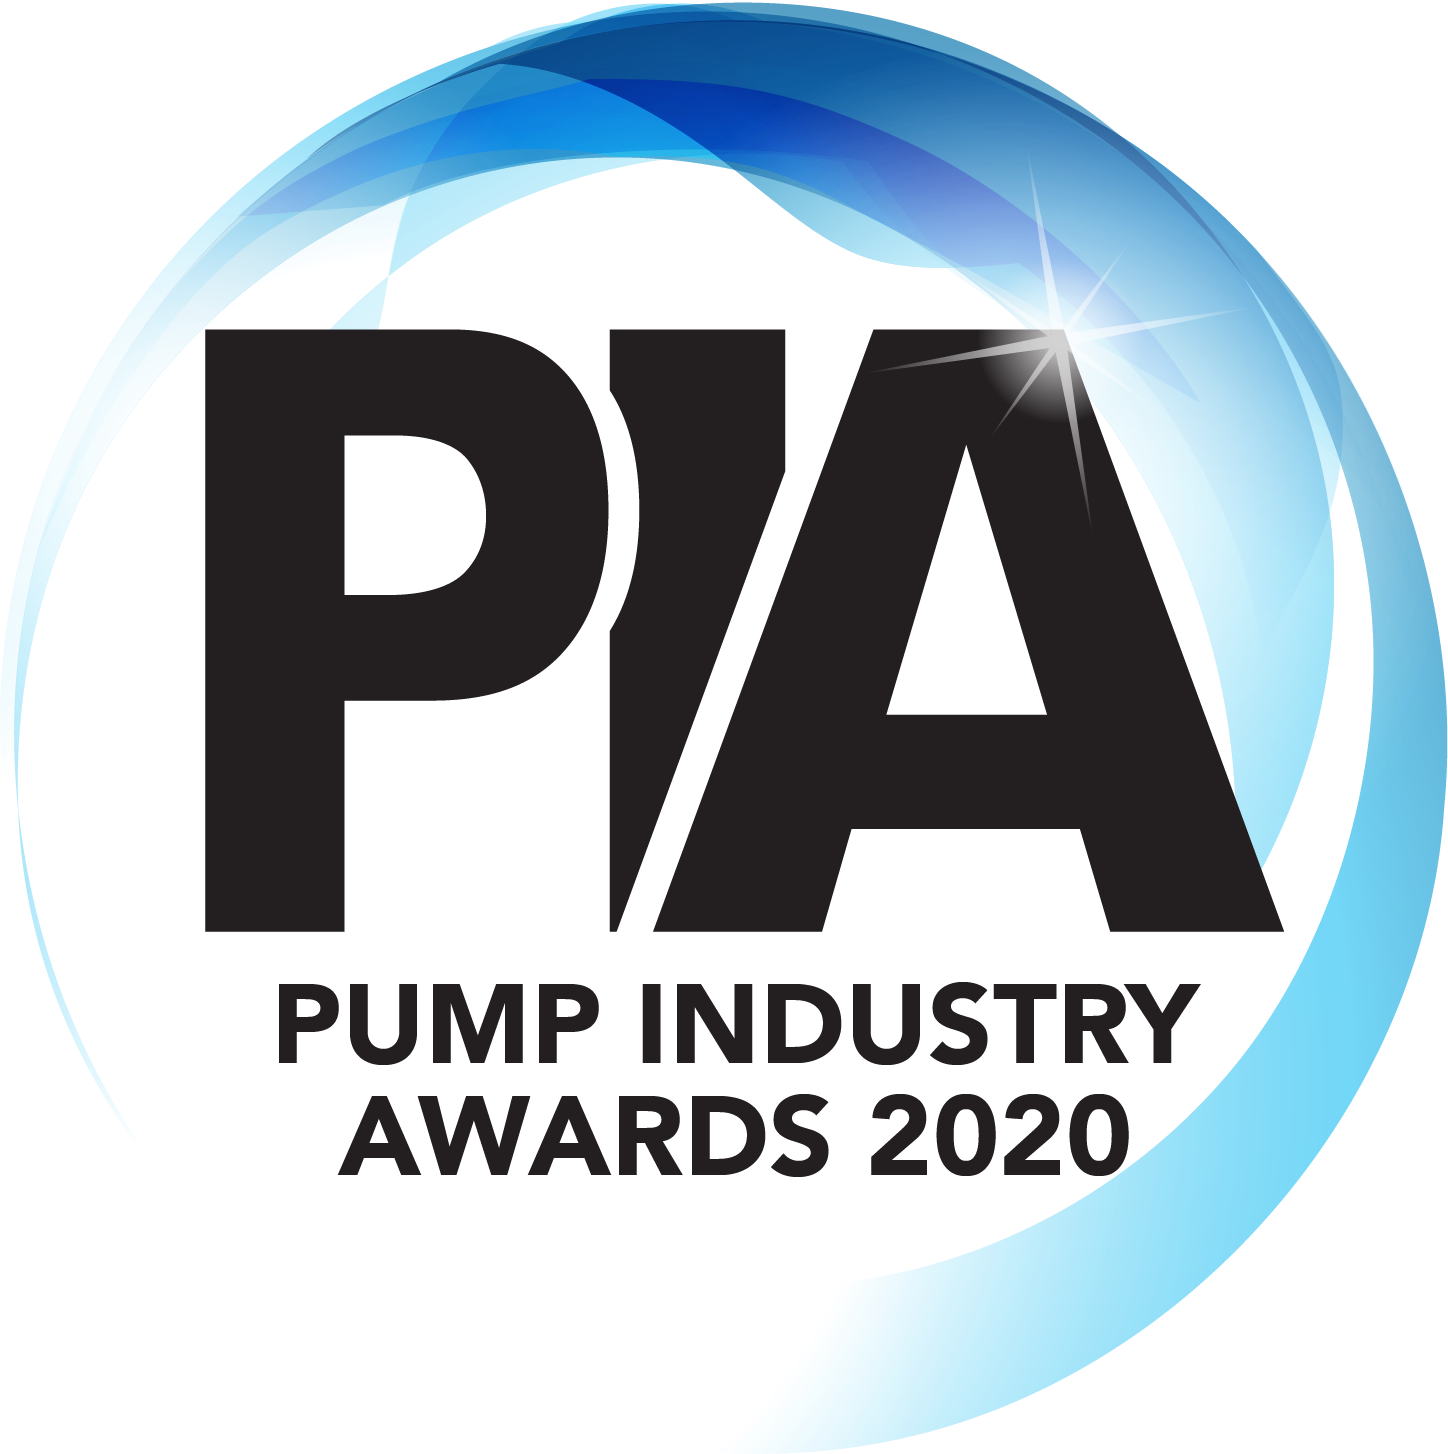 The 2020 Pump Industry Awards will now take place in December.